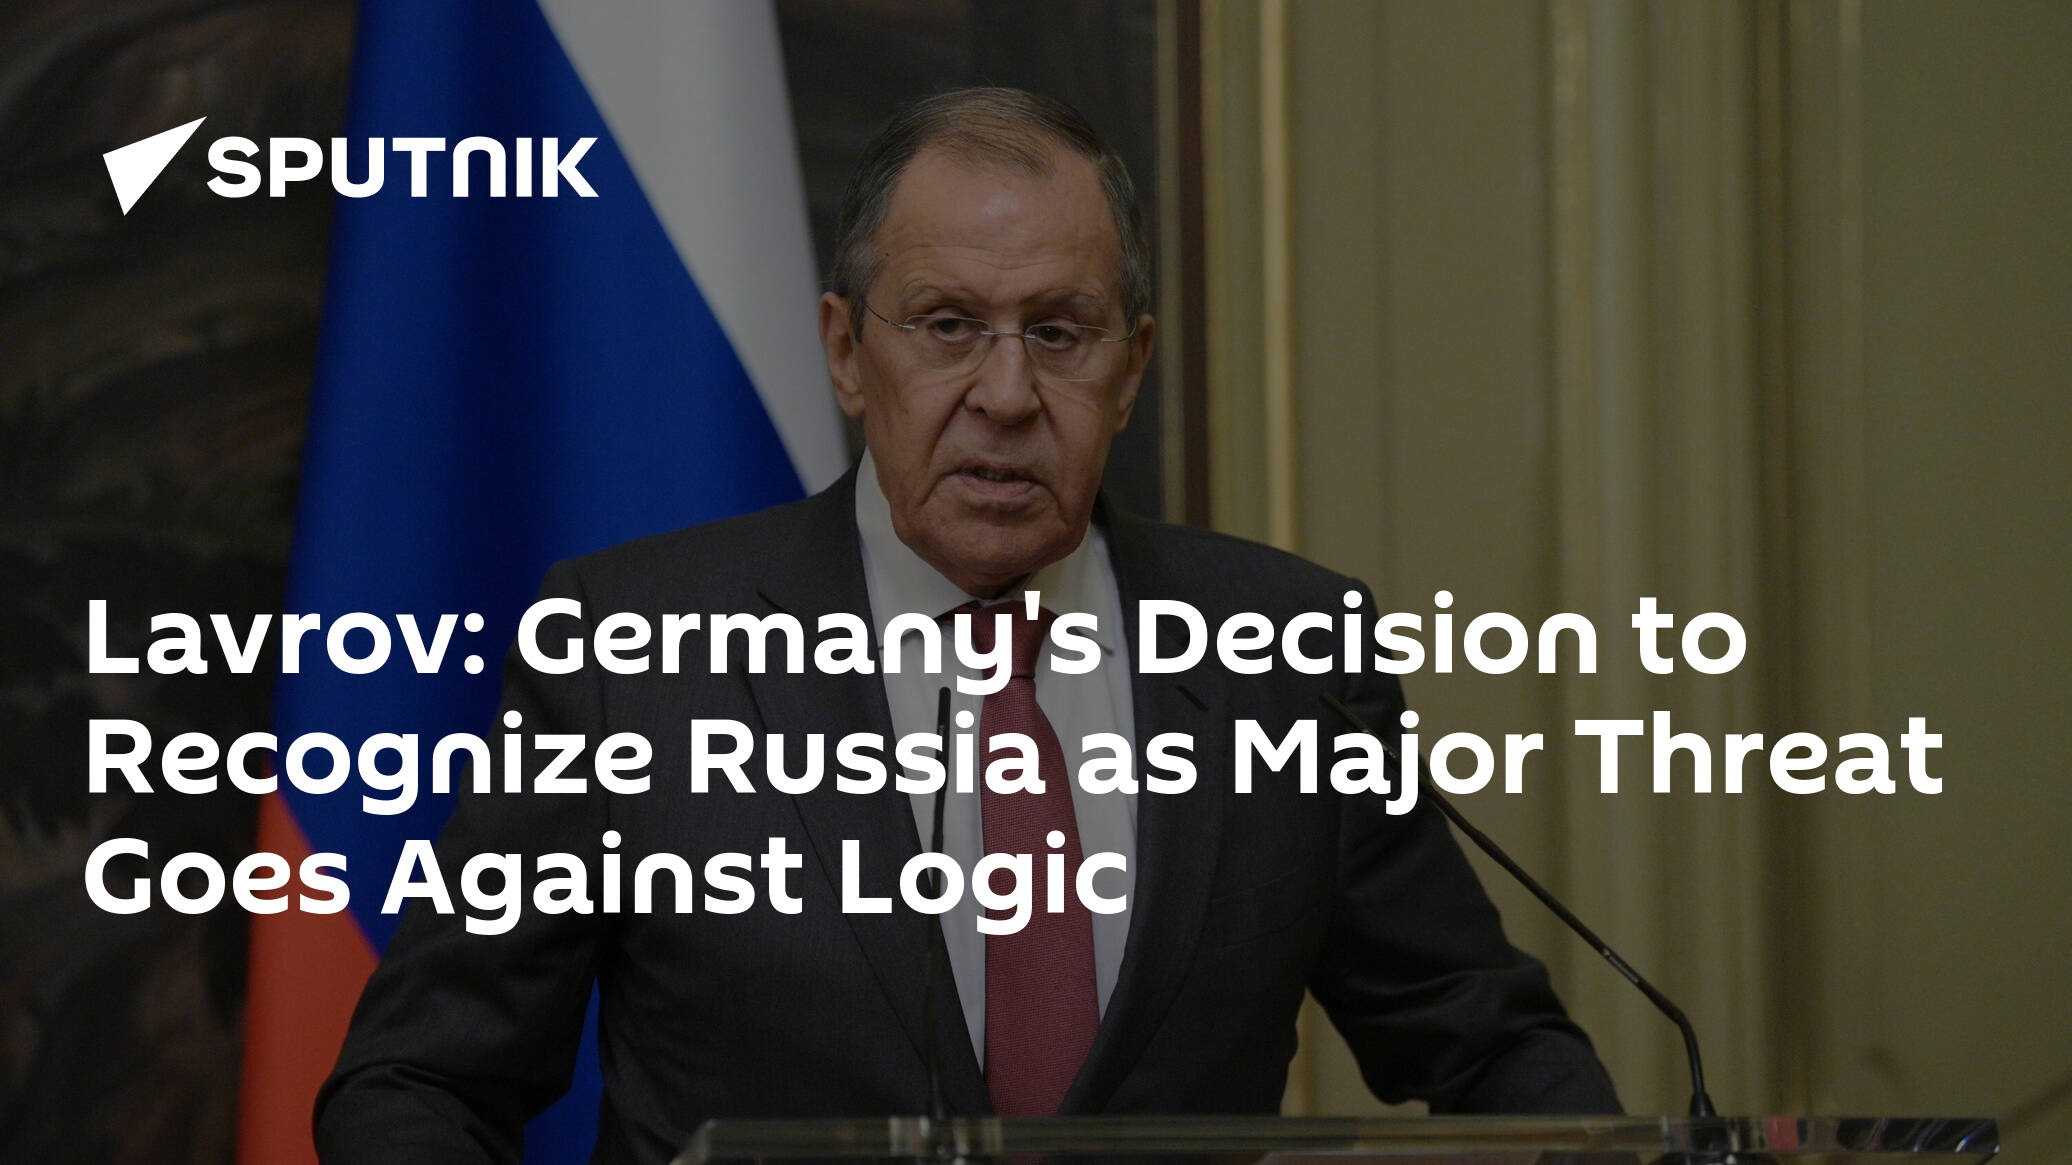 Lavrov: Germany's Decision to Recognize Russia as Major Threat Goes Against Logic